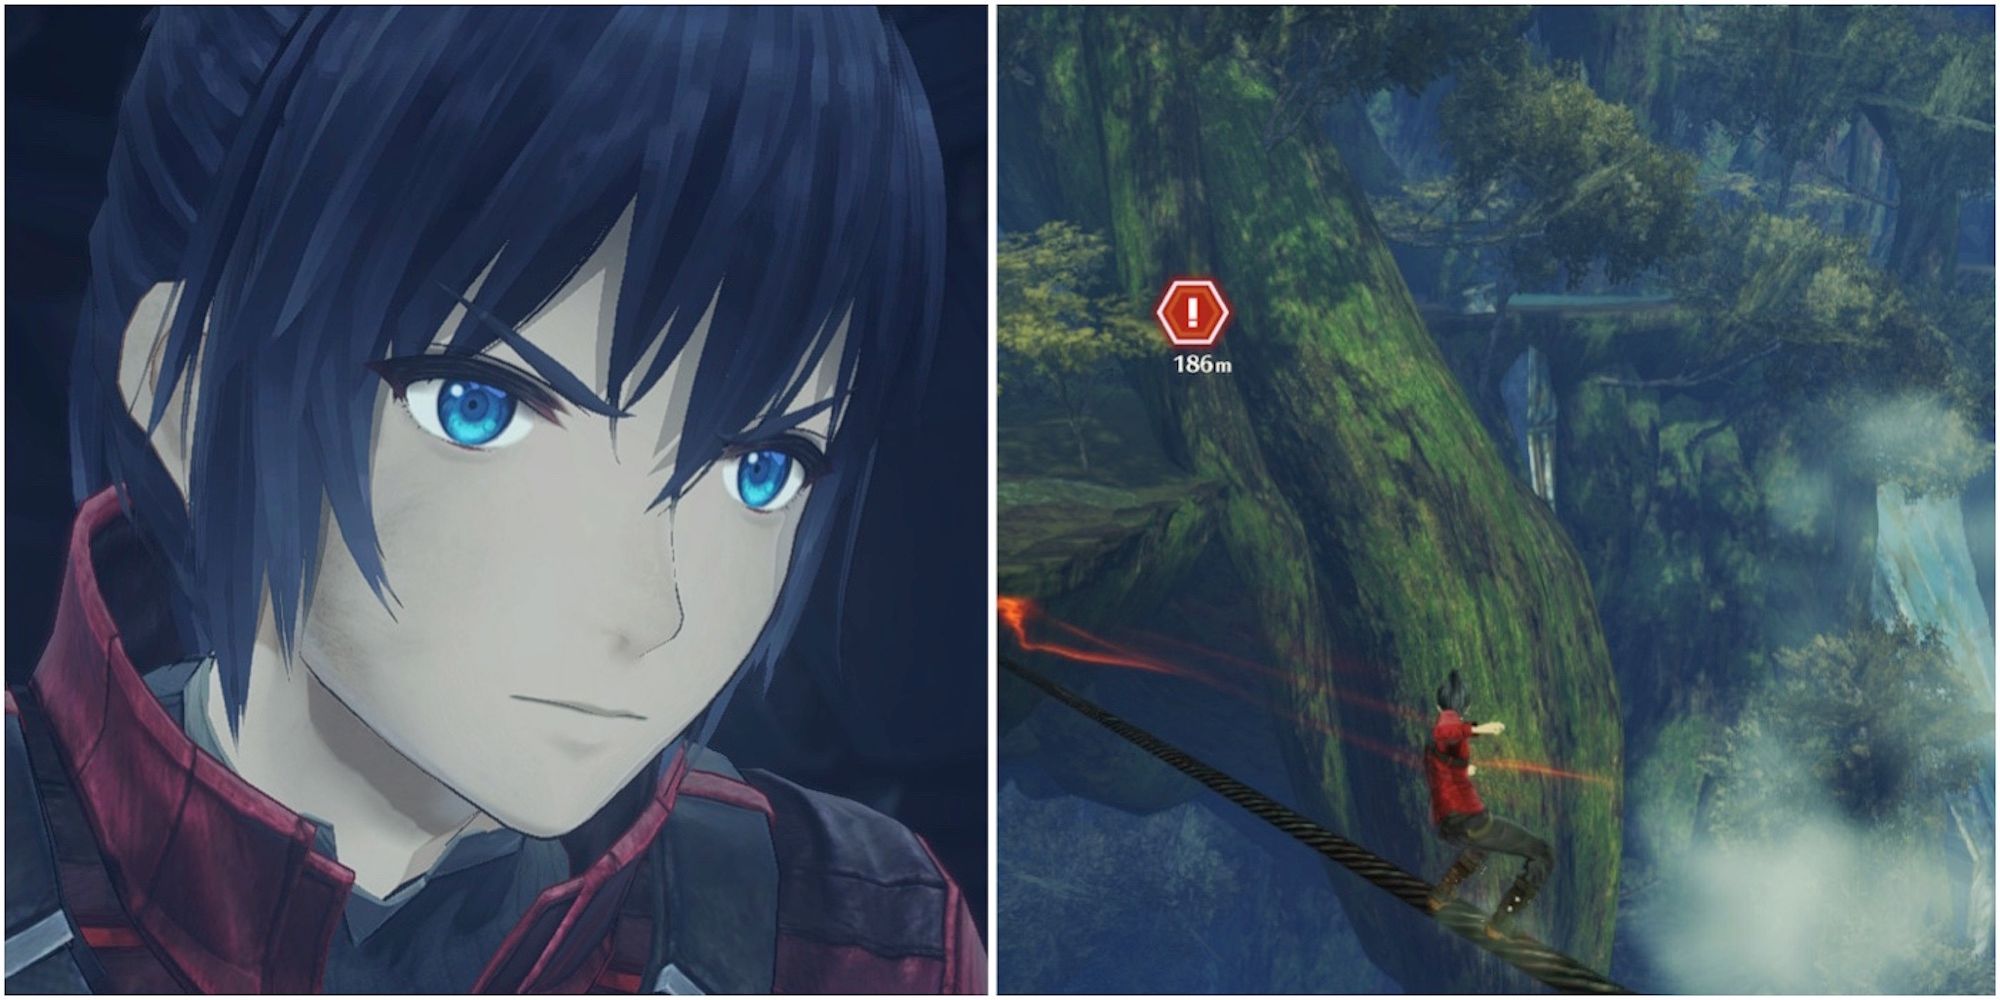 Noah and exploring the world in Xenoblade Chronicles 3